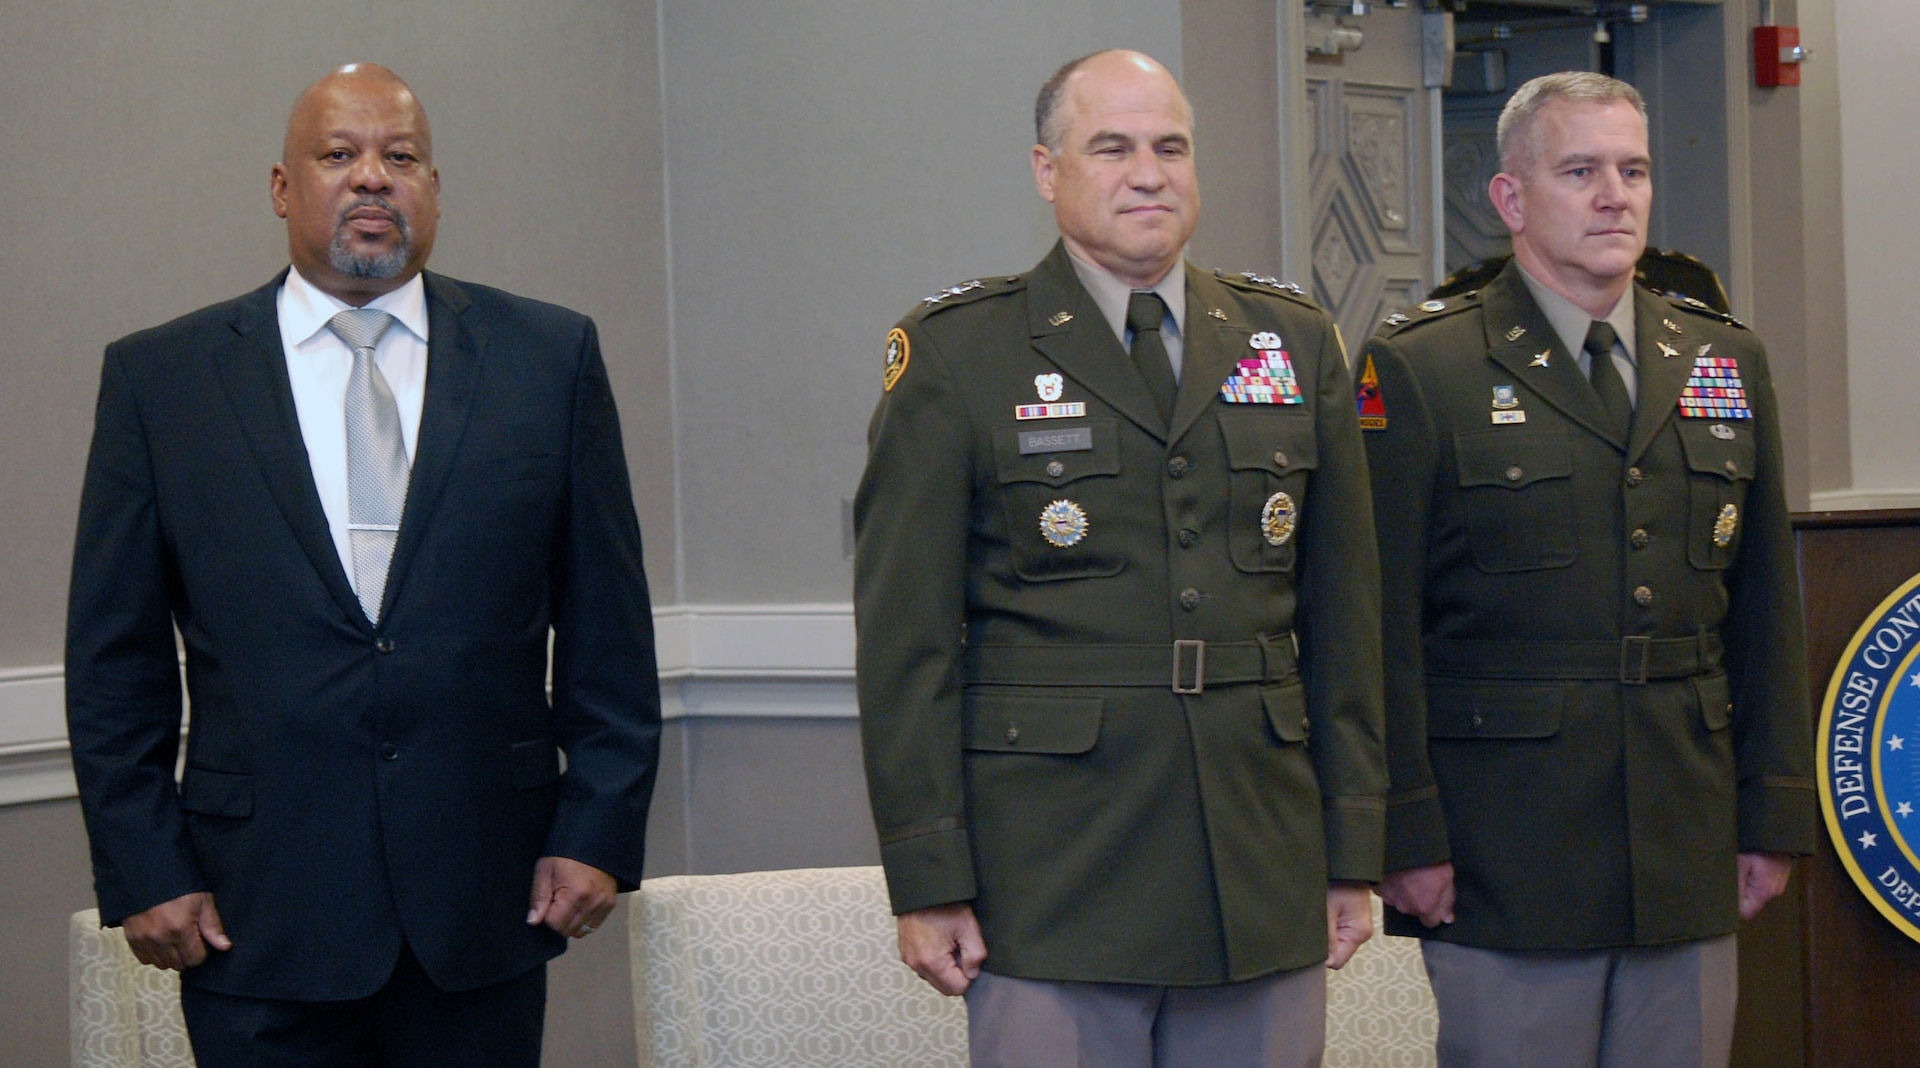 One man wears a dark suit while the other two men wear formal Army uniforms